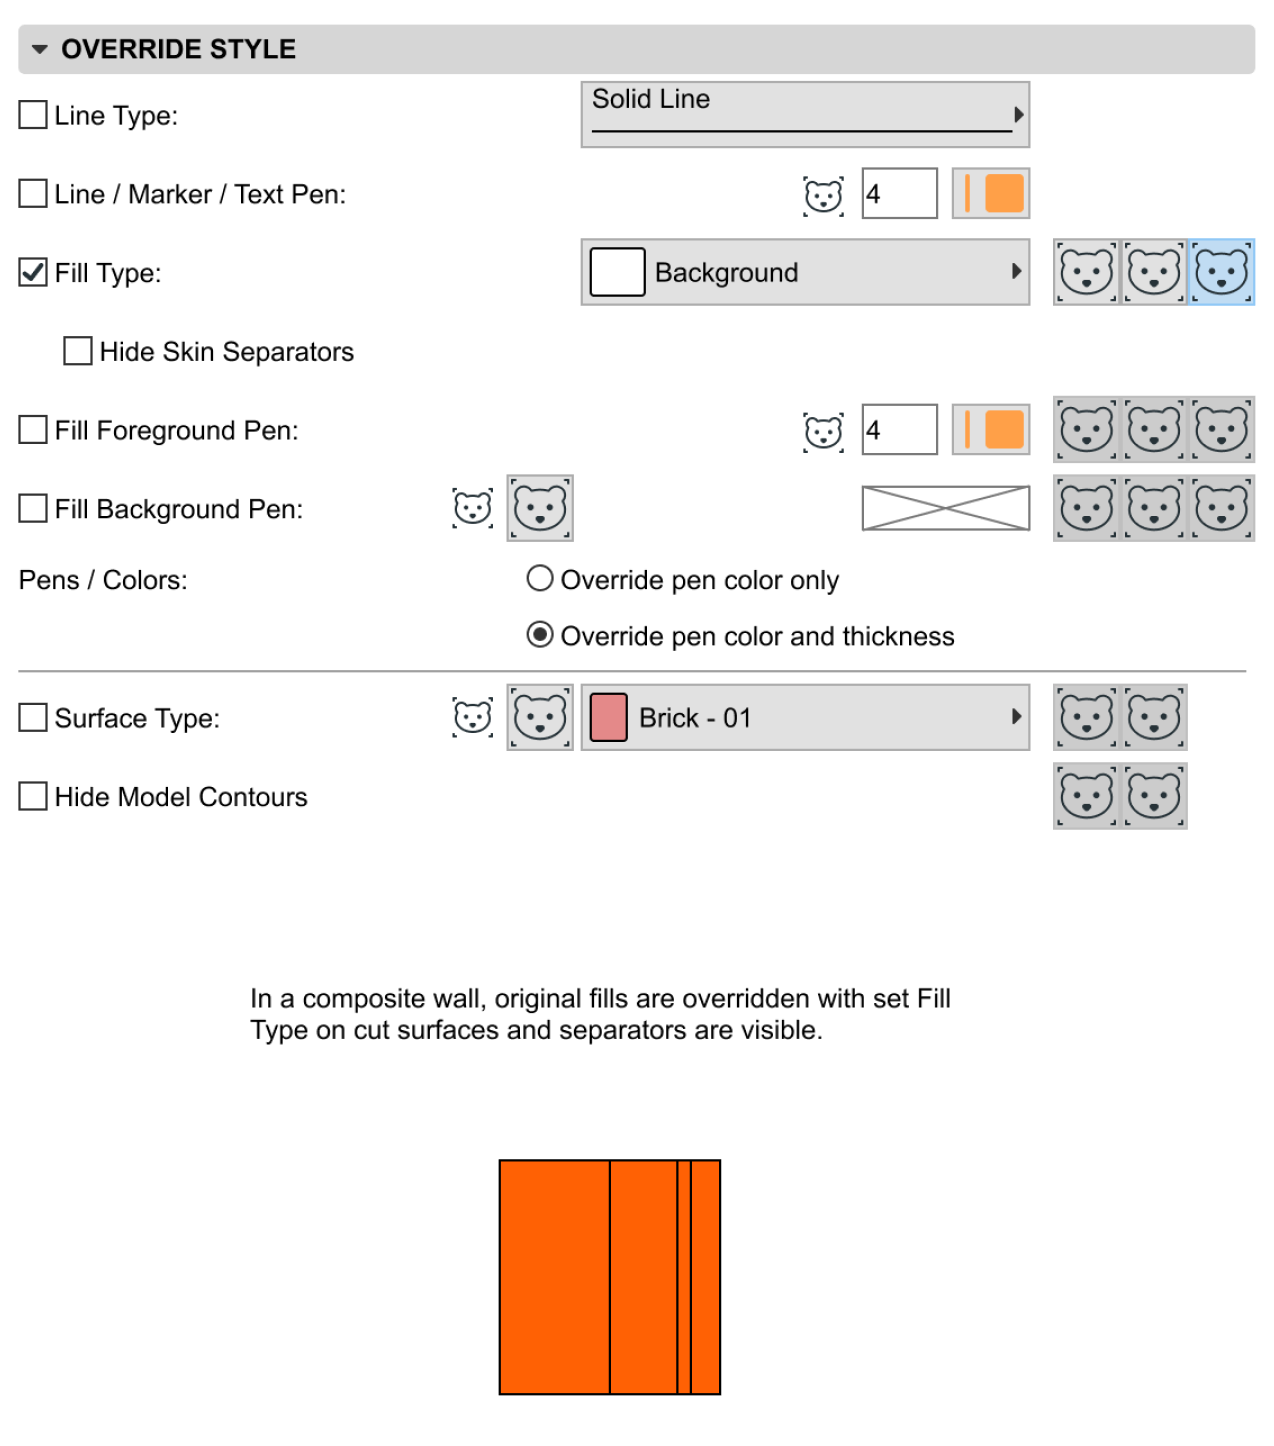 Graphic Override Rule settings in Archicad